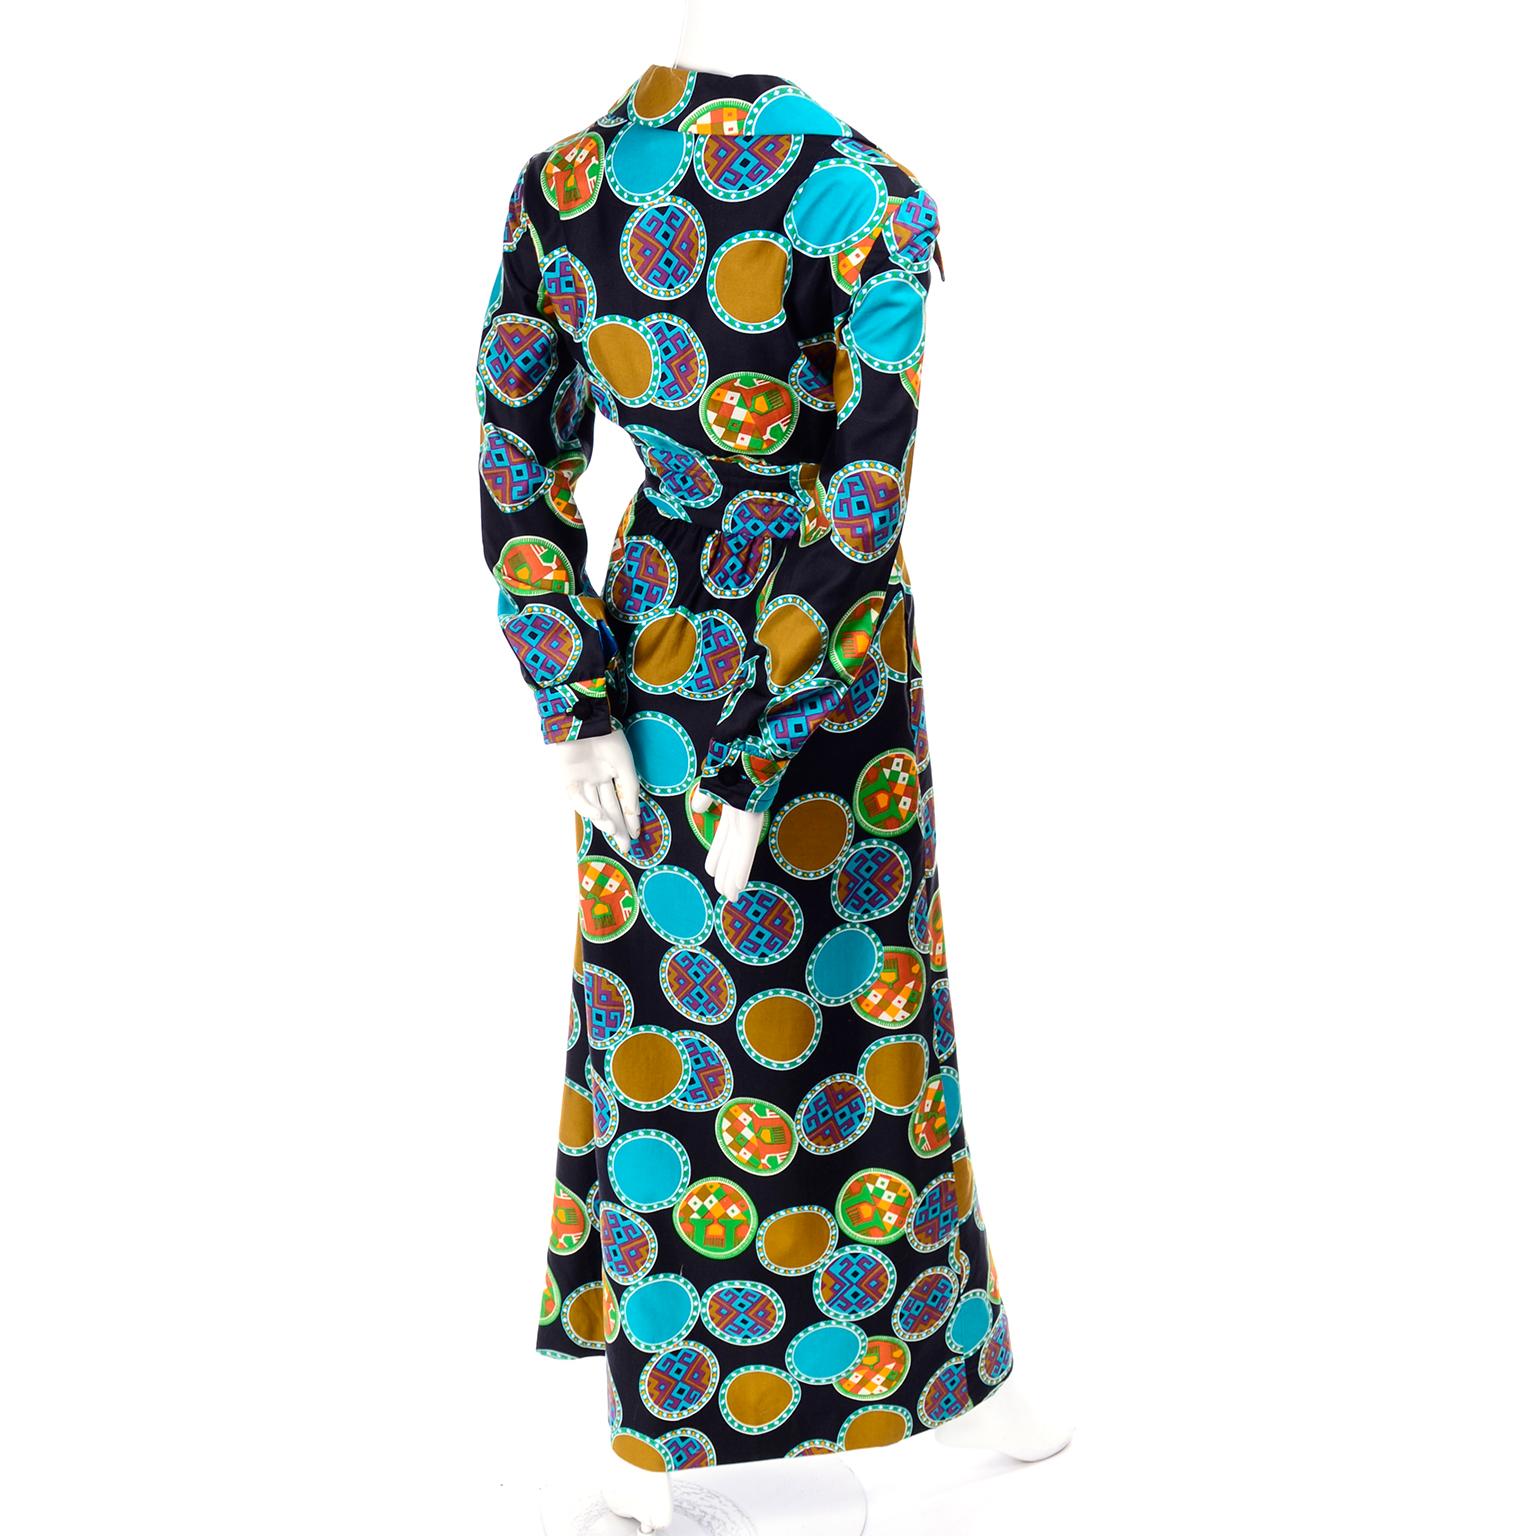 Black Vintage Dynasty Cotton Maxi Dress in Colorful Medallion Print With Pockets